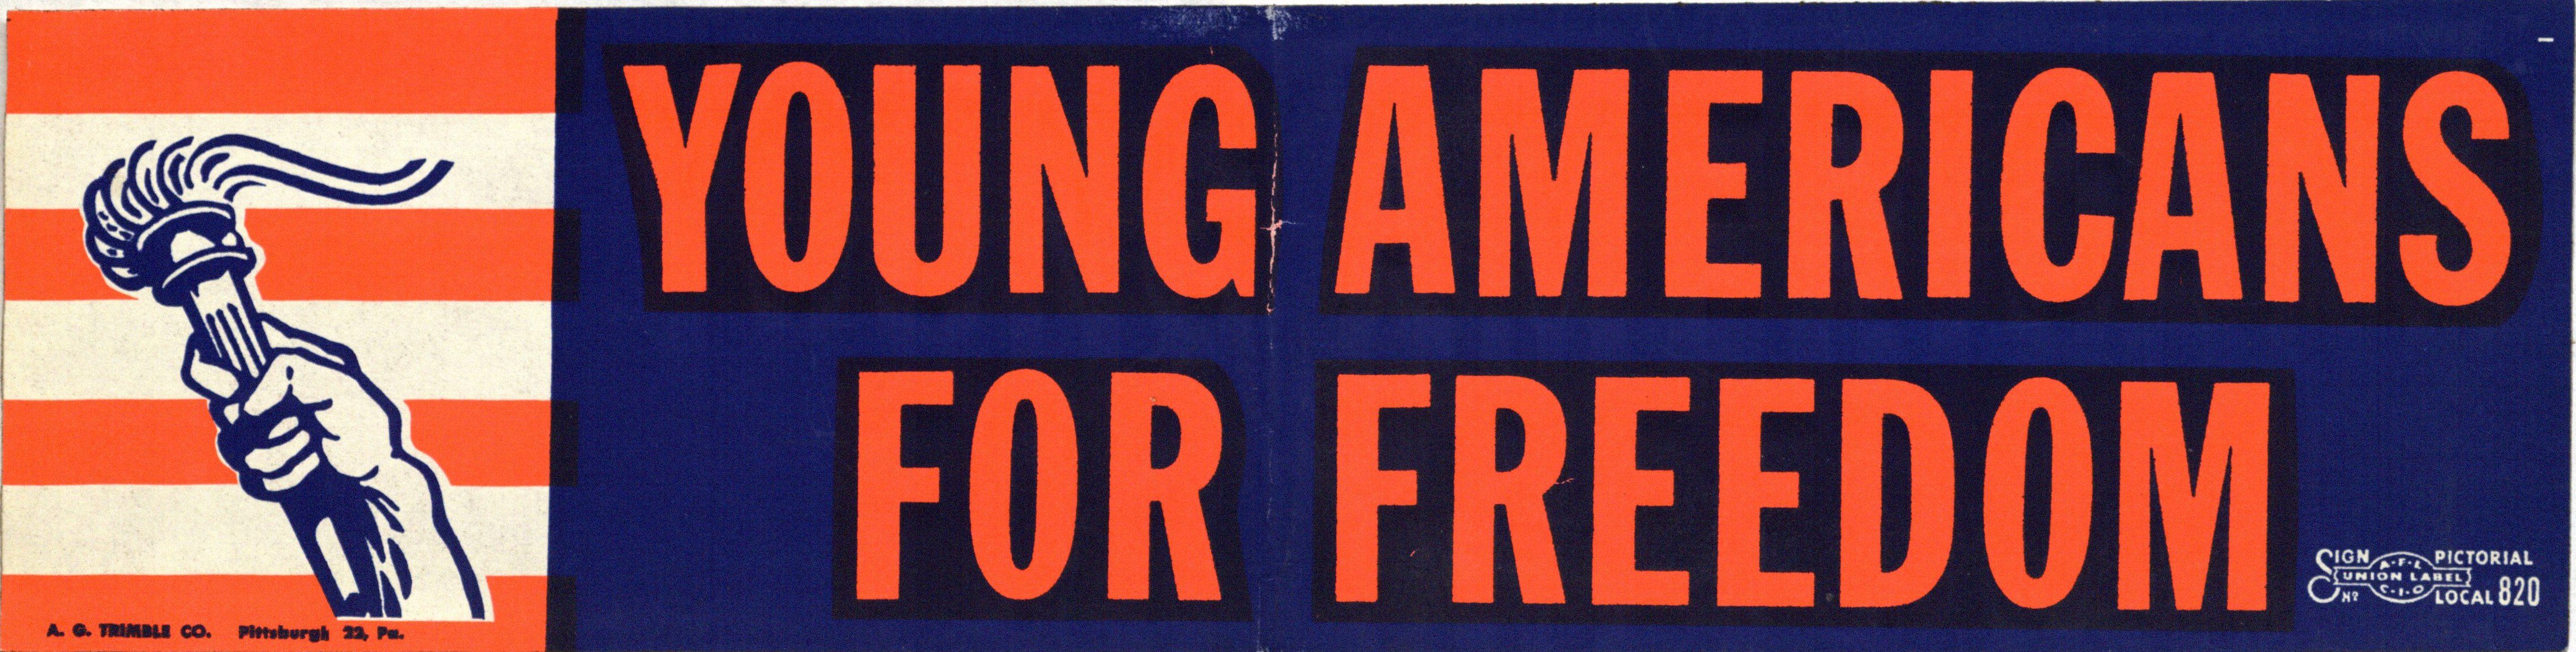 Bumper STicker: Young Americans for Freedom.